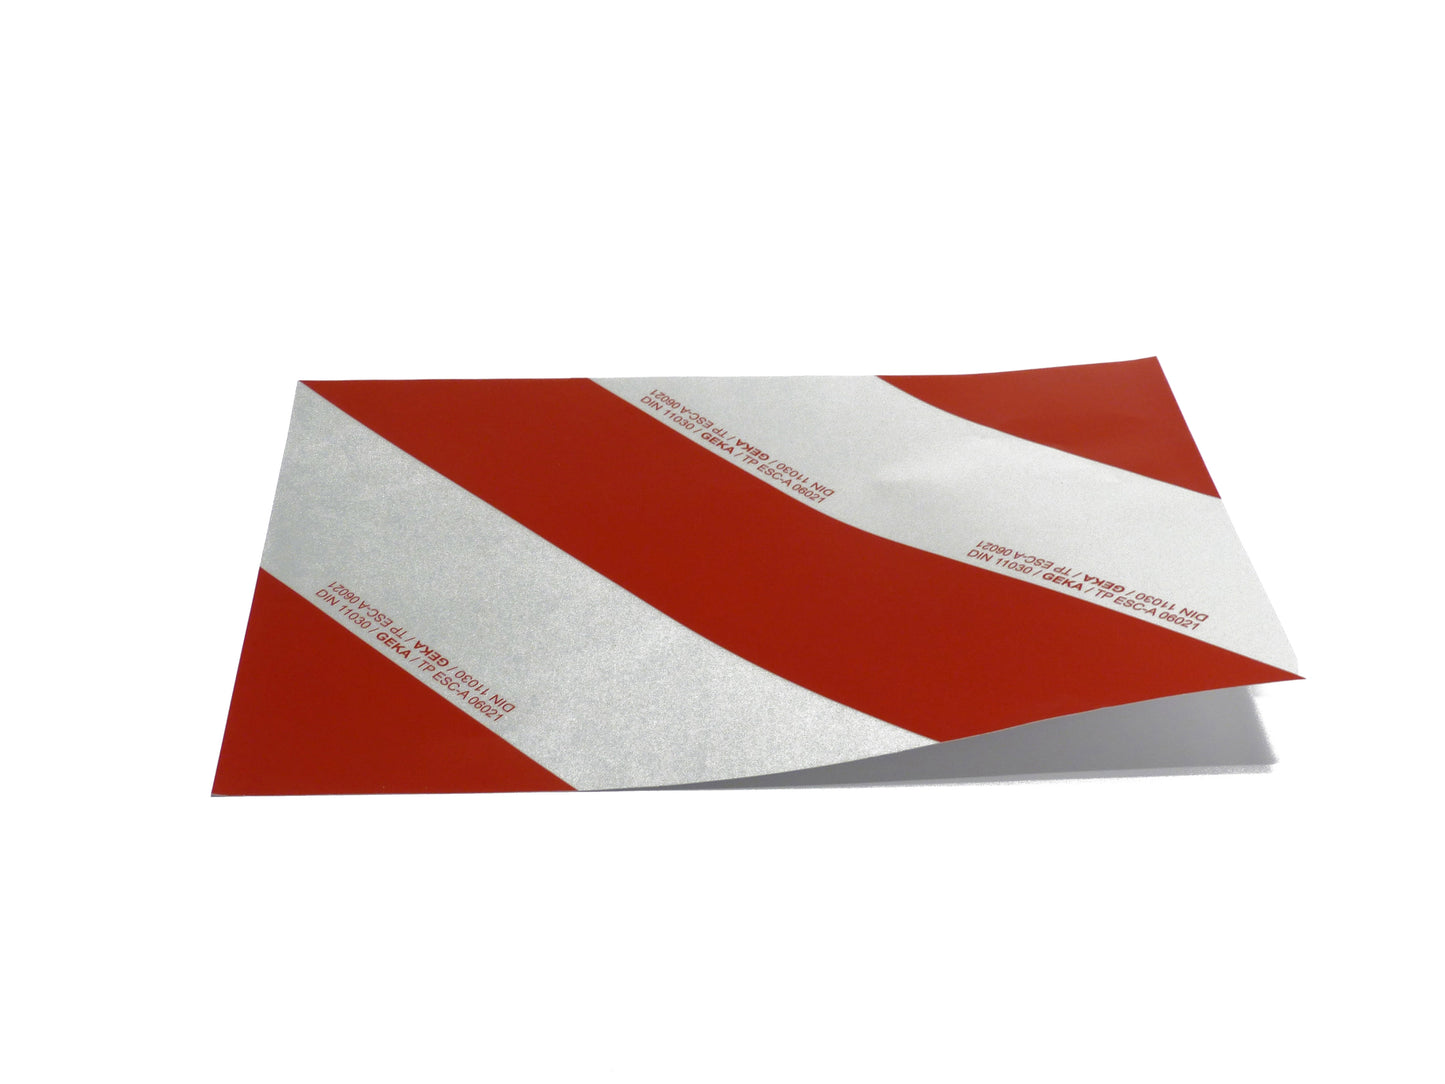 Reflective foil self adhesive 423mm x 282mm